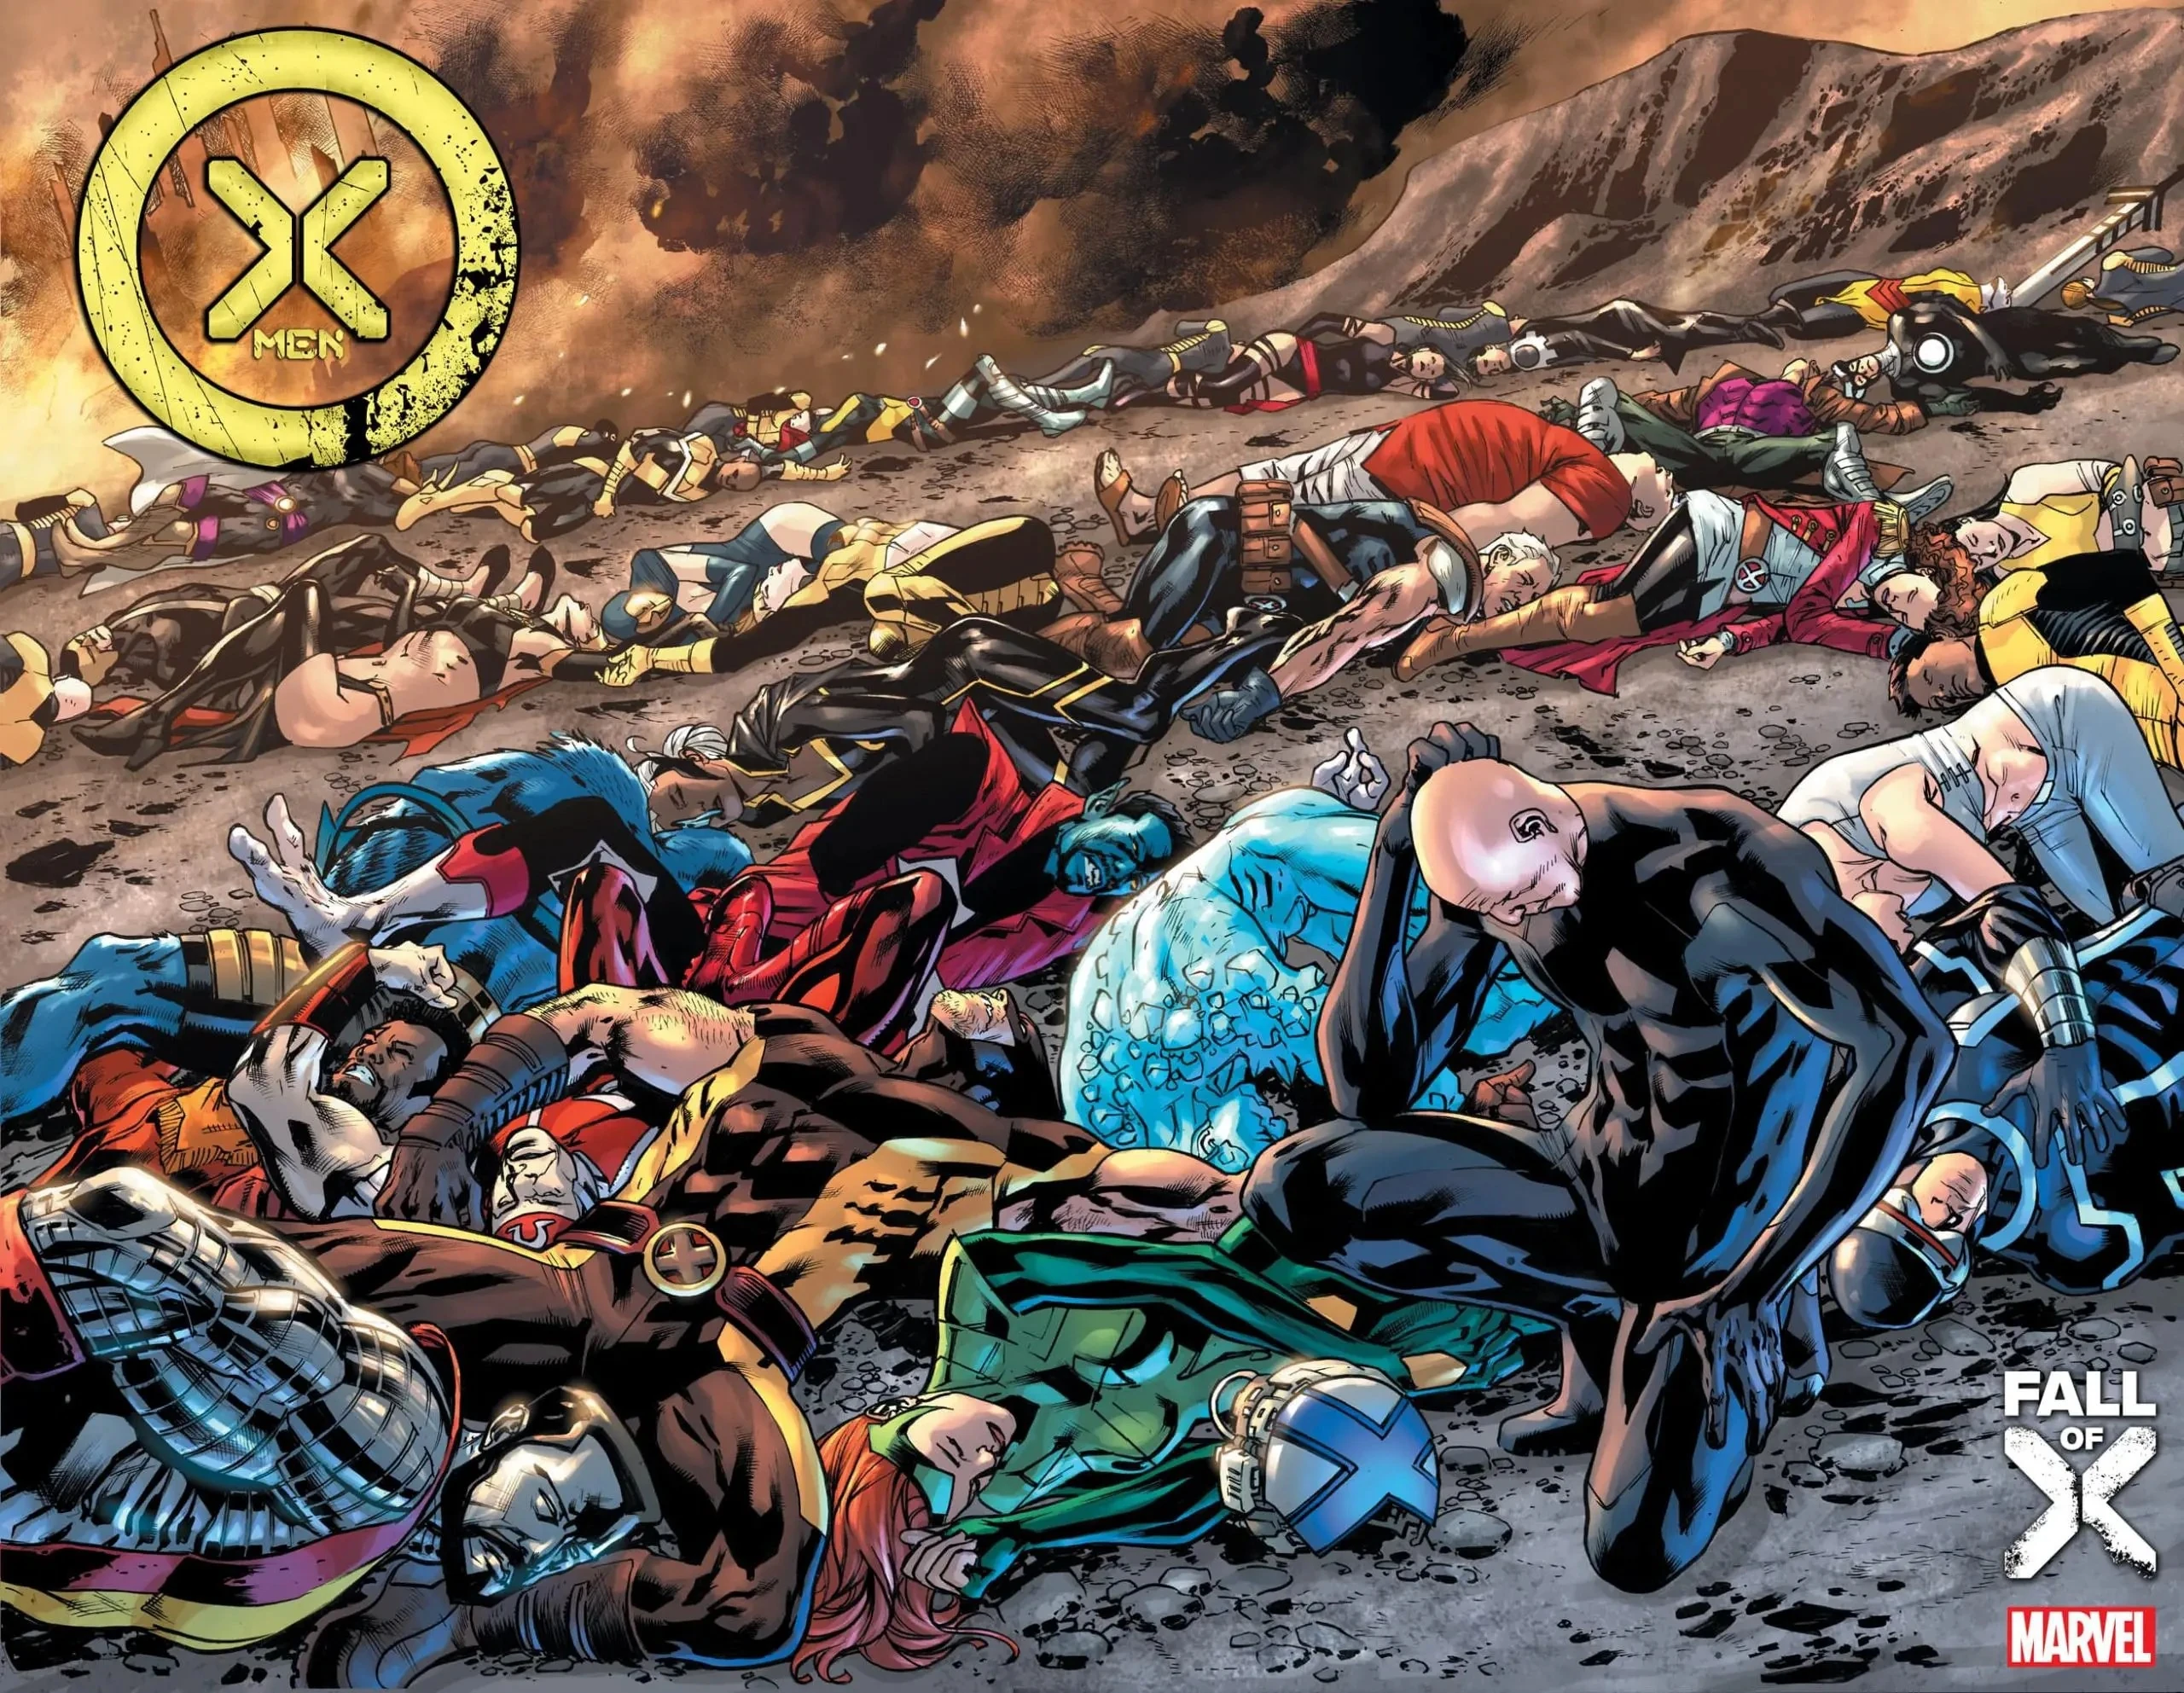 Professor X mourns The Fall of X on Bryan Hitch's variant cover to X-Men Vol. 6 #25 "From The Shadows" (2023), Marvel Comics.